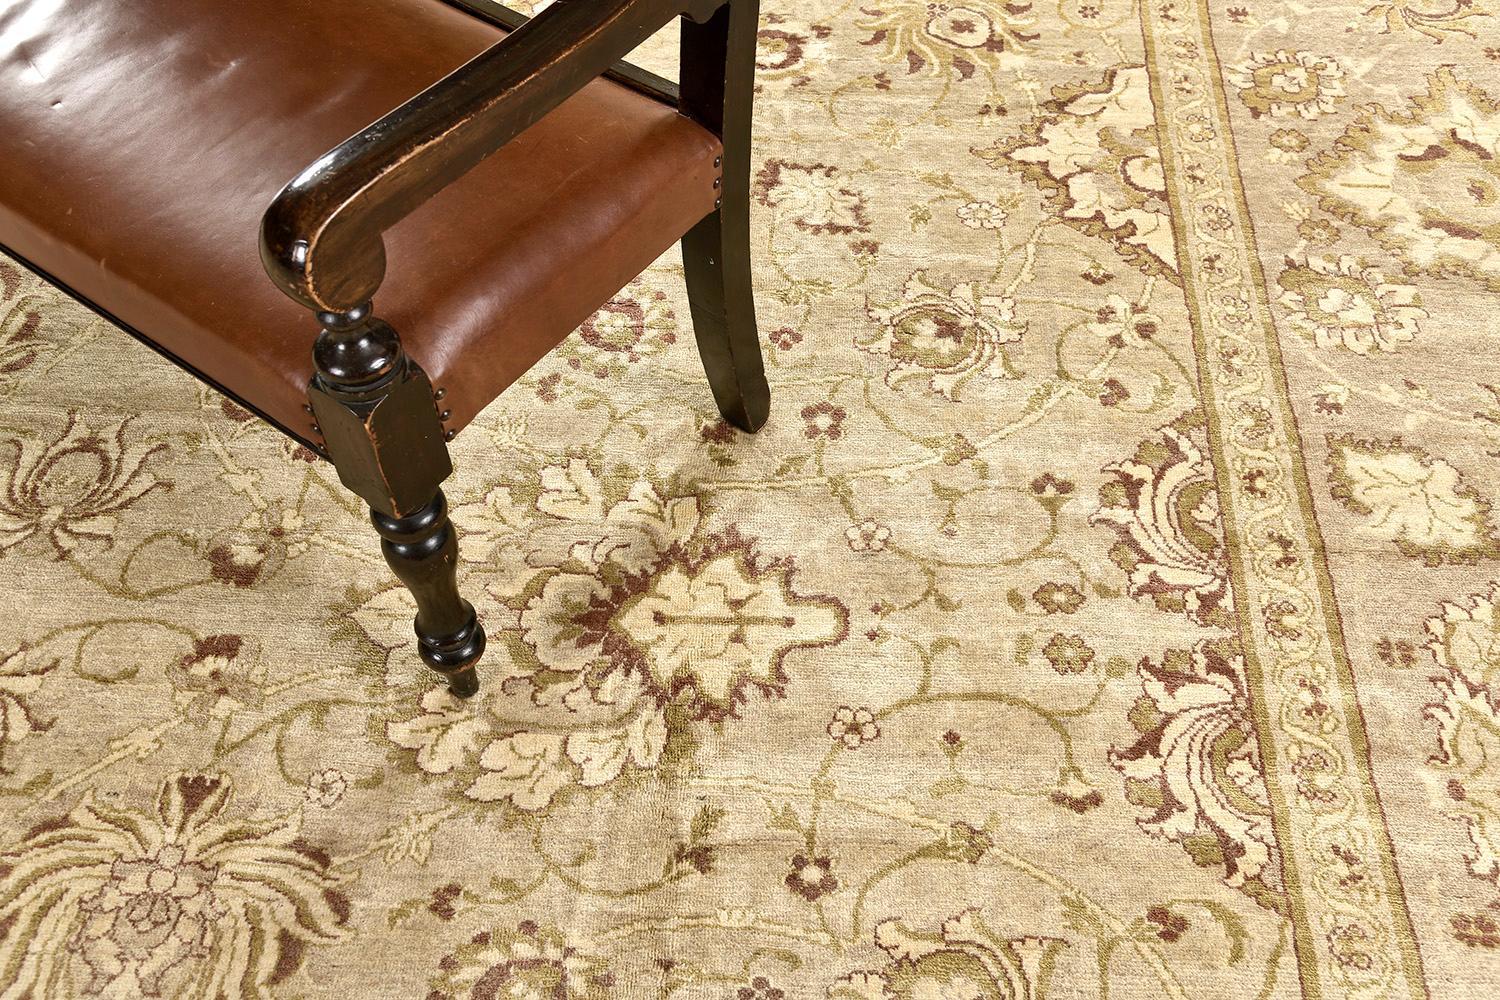 This luxurious revival of Sultanabad is nothing shy of elegance and artistry. This traditional masterpiece encompasses beautiful floral scrolls and traditional Persian designs in neutral tones with golden outlines. This rug is suitable for both